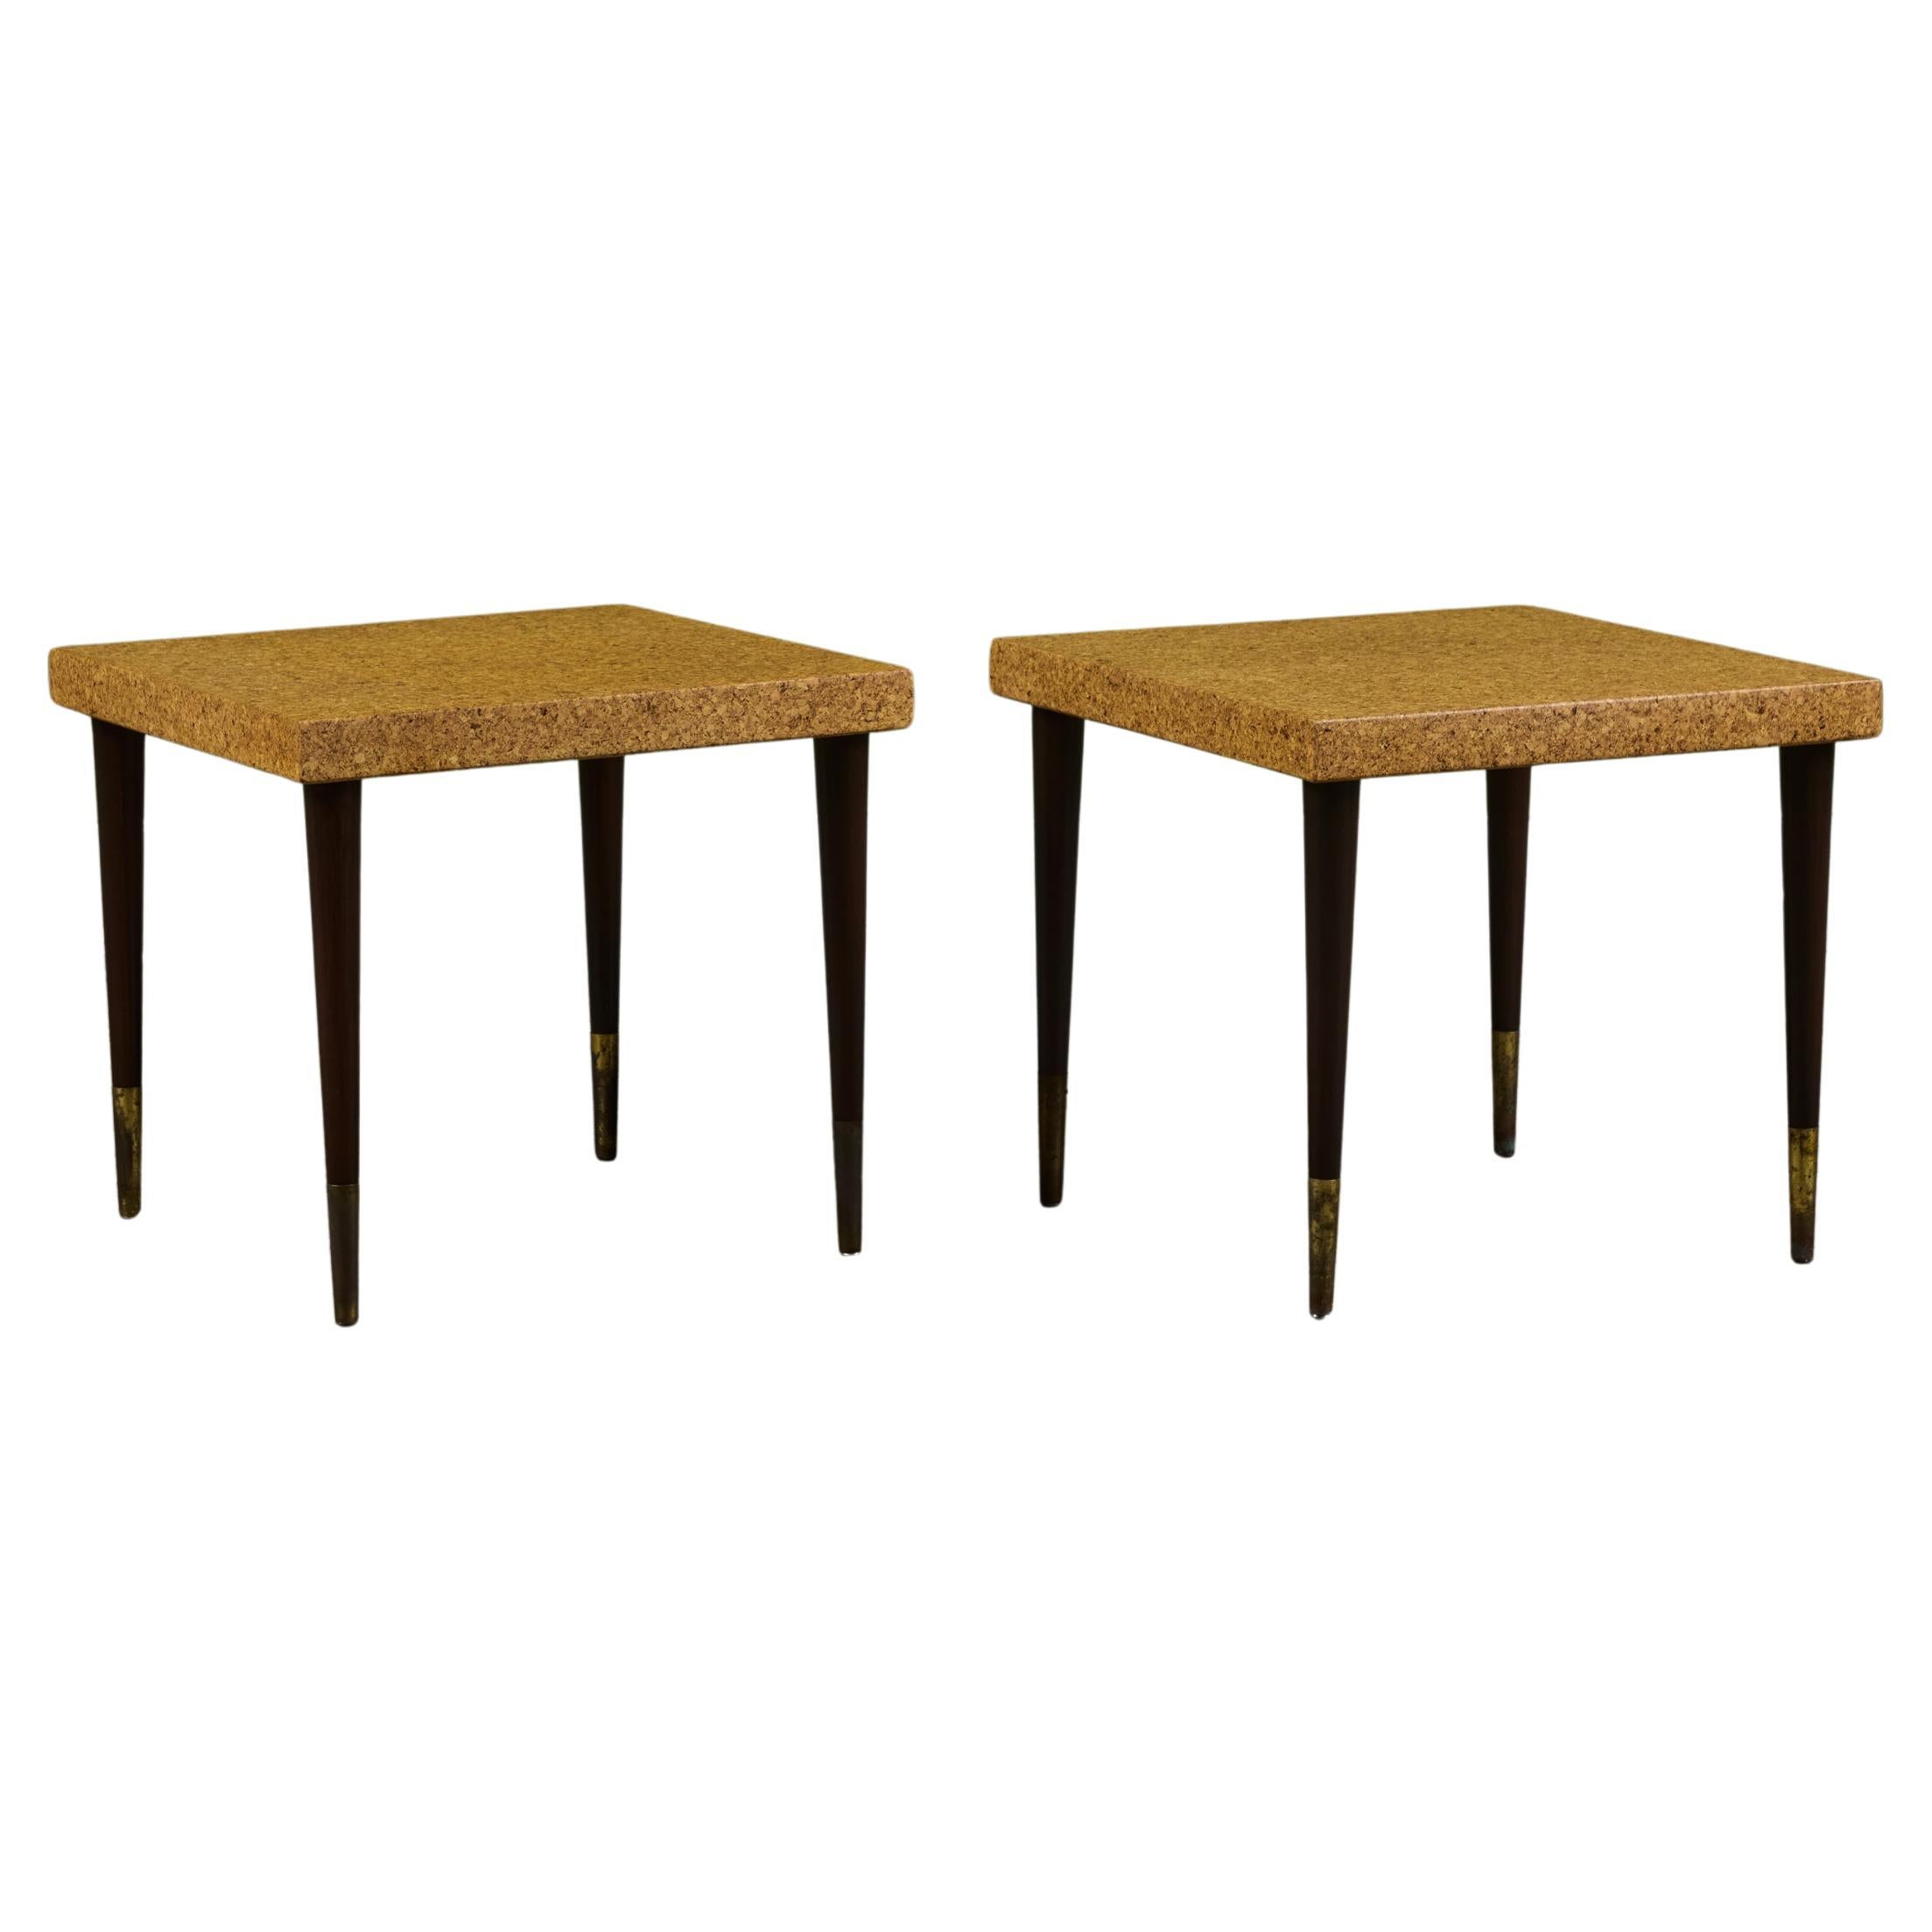 Pair of Paul Frankl Cork Side Tables for Johnson Furniture Co.